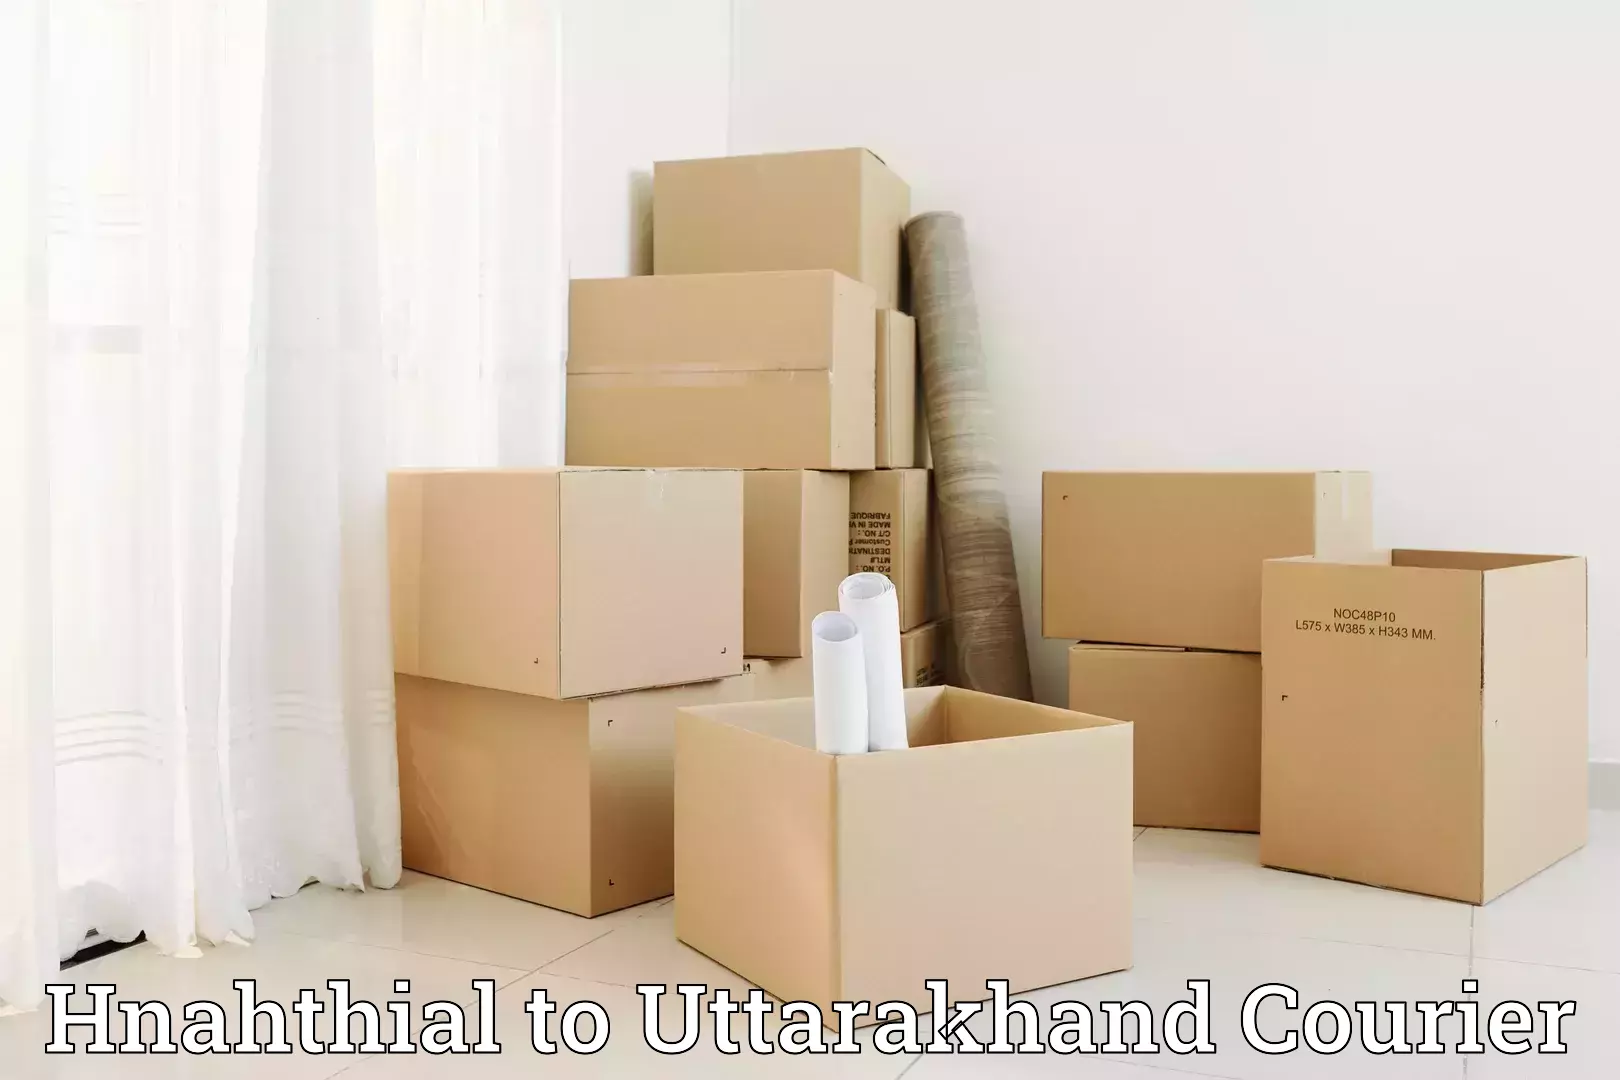 Professional moving company Hnahthial to Gumkhal